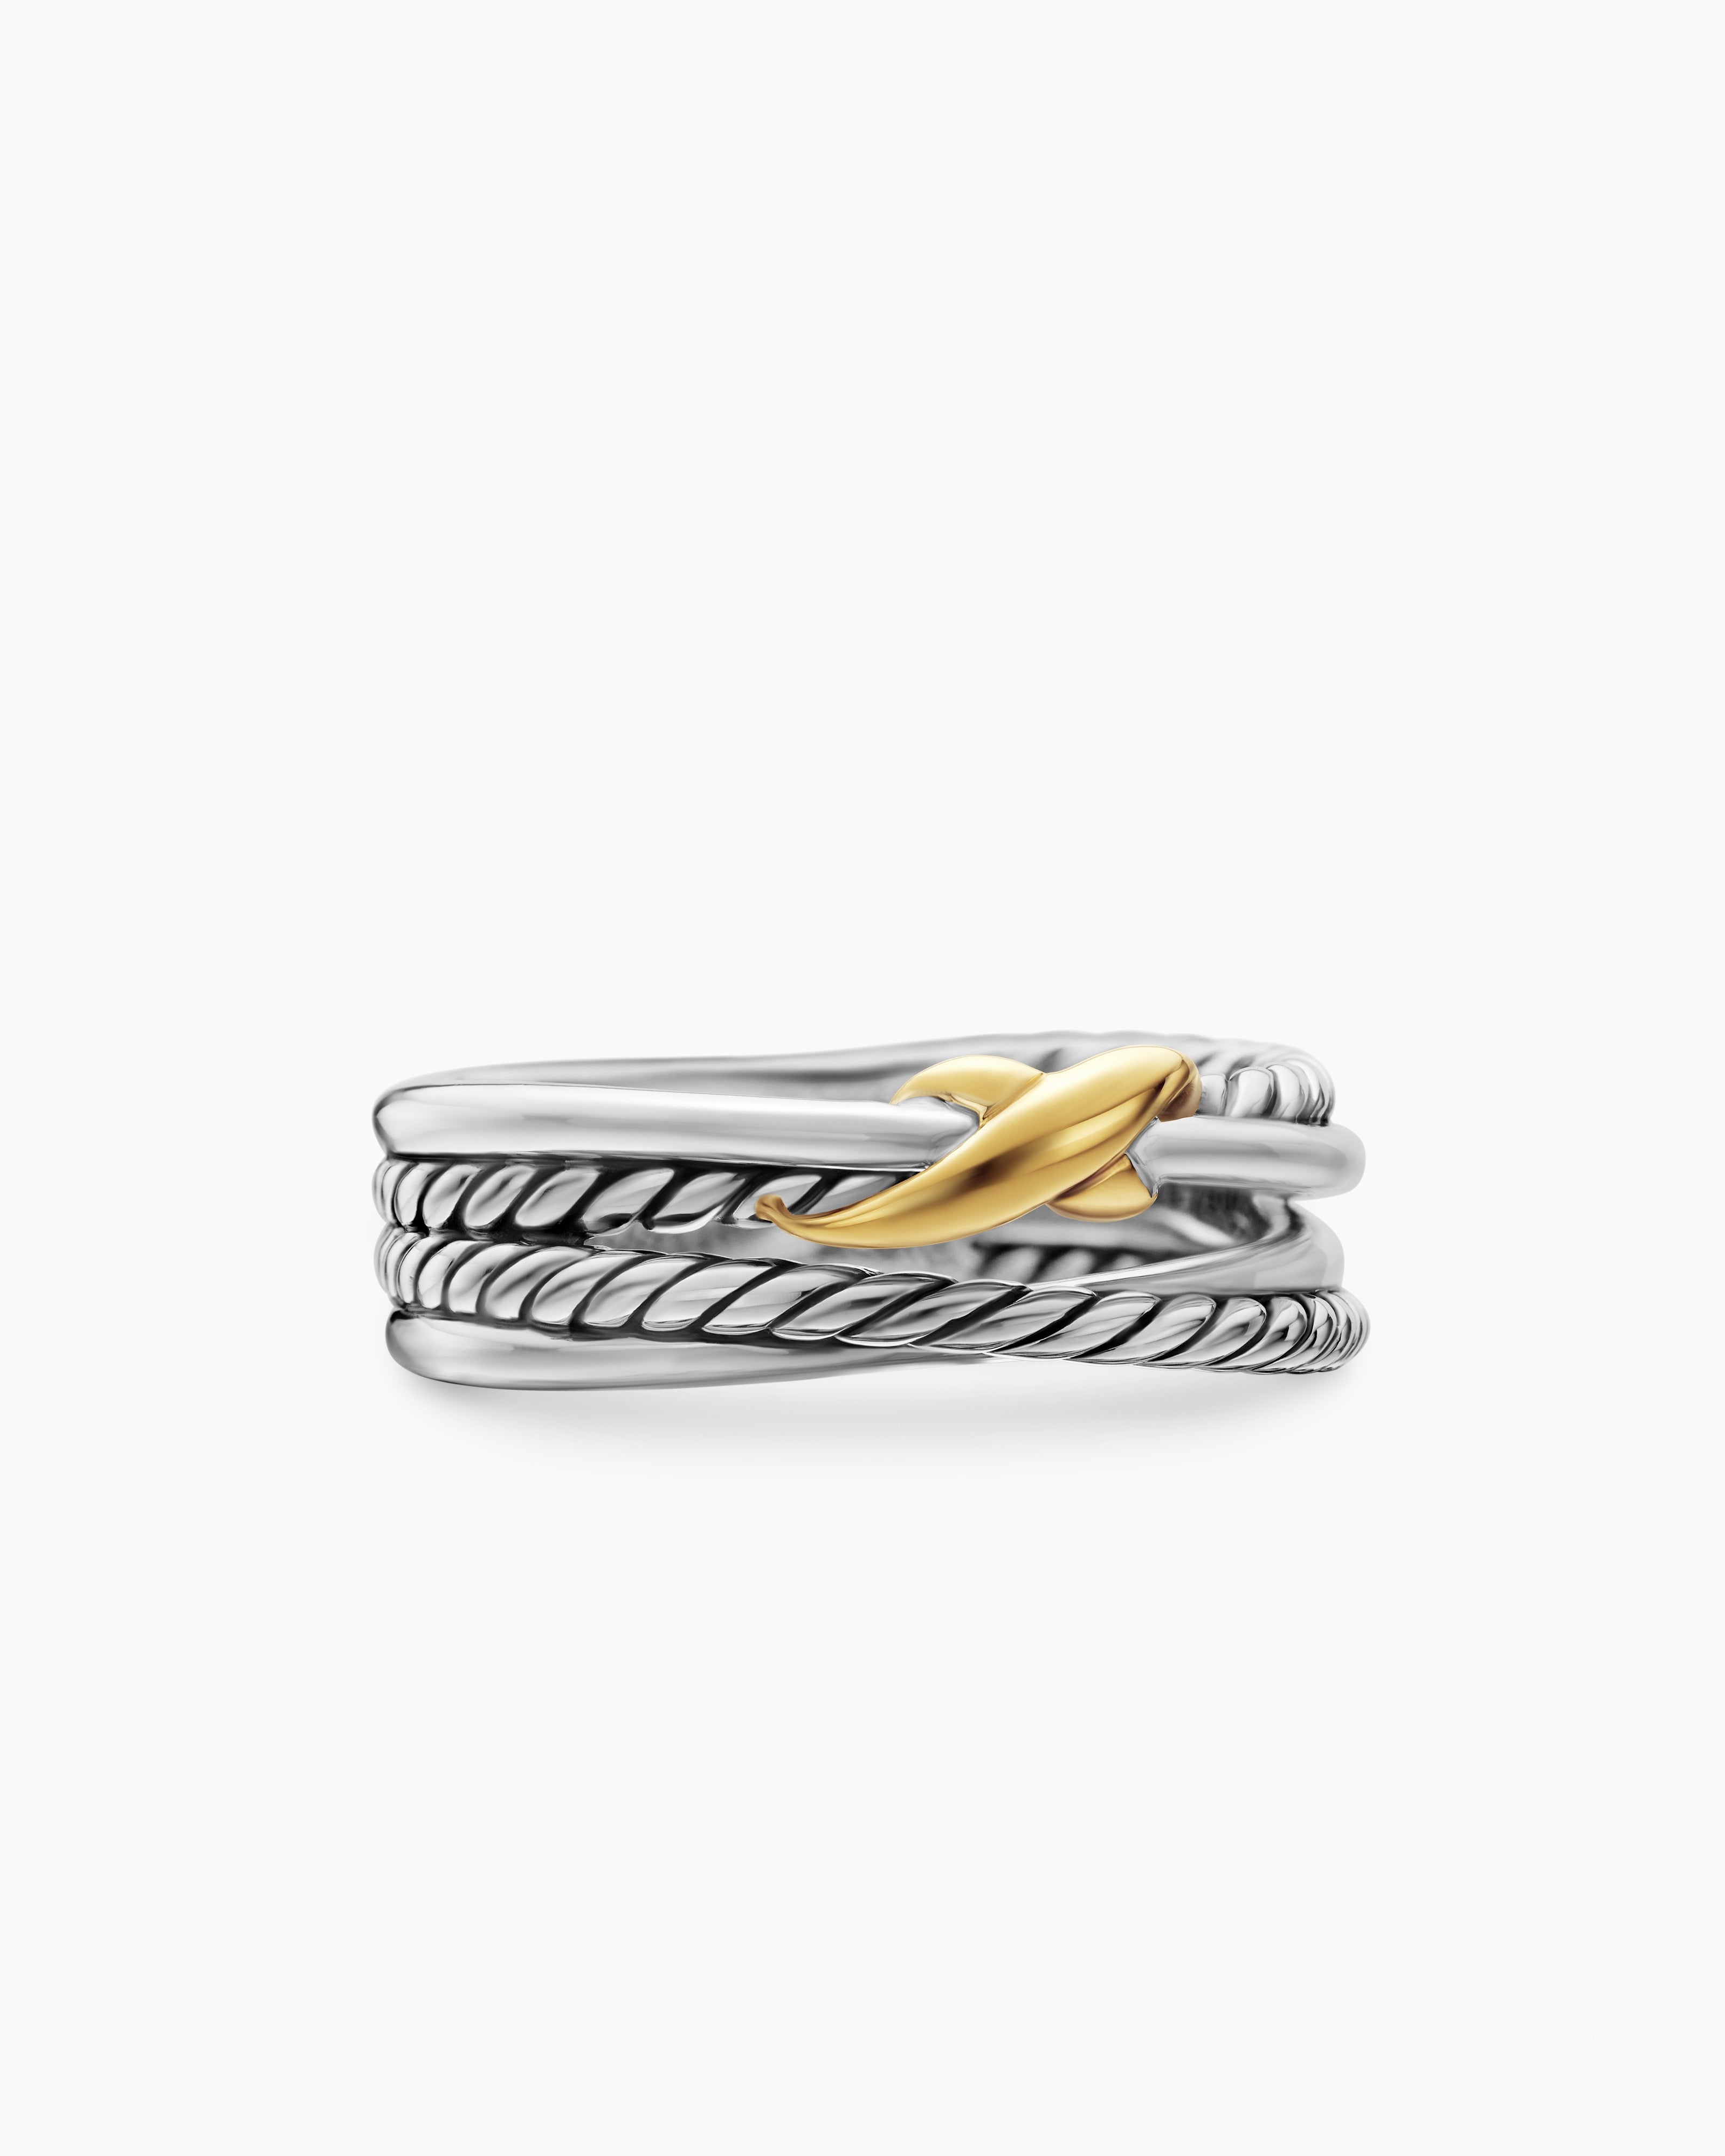 Explore Stunning Silver Rings Collection for Men and Women – GIVA Jewellery